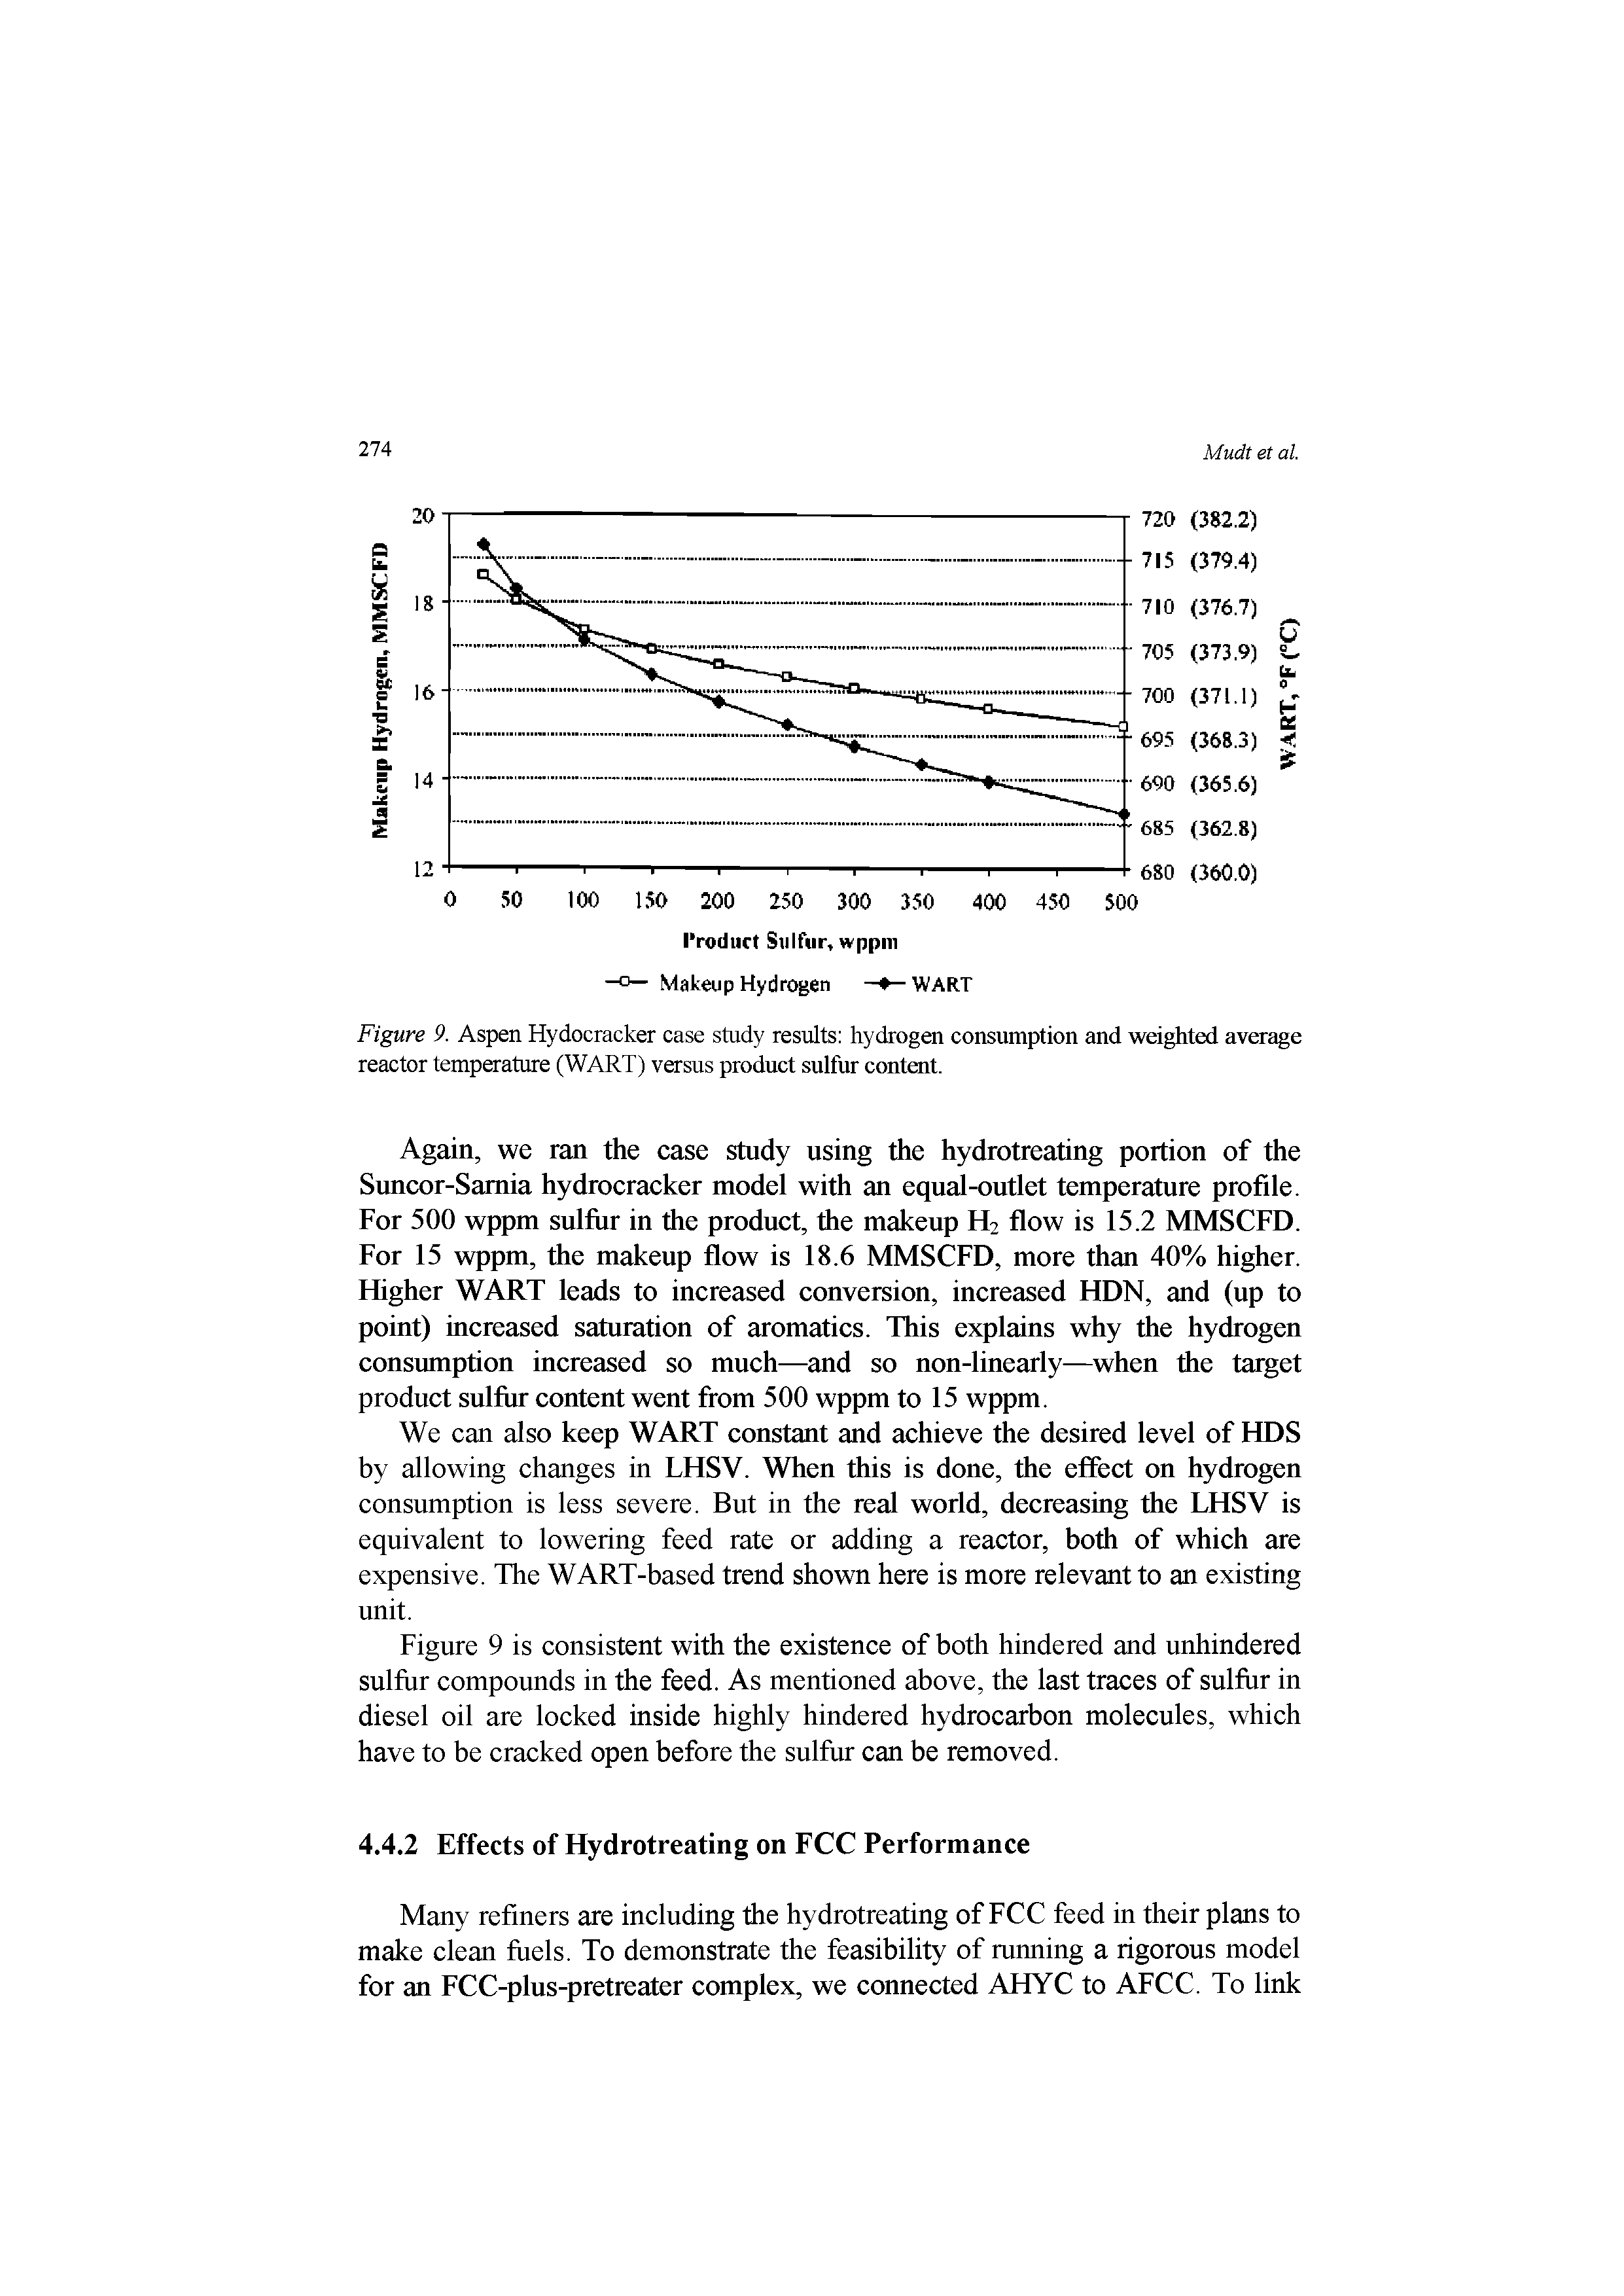 Figure 9. Aspen Hydocracker case study results hydrogen consumption and weighted average reactor temperature (WART) versus product sulfur content.